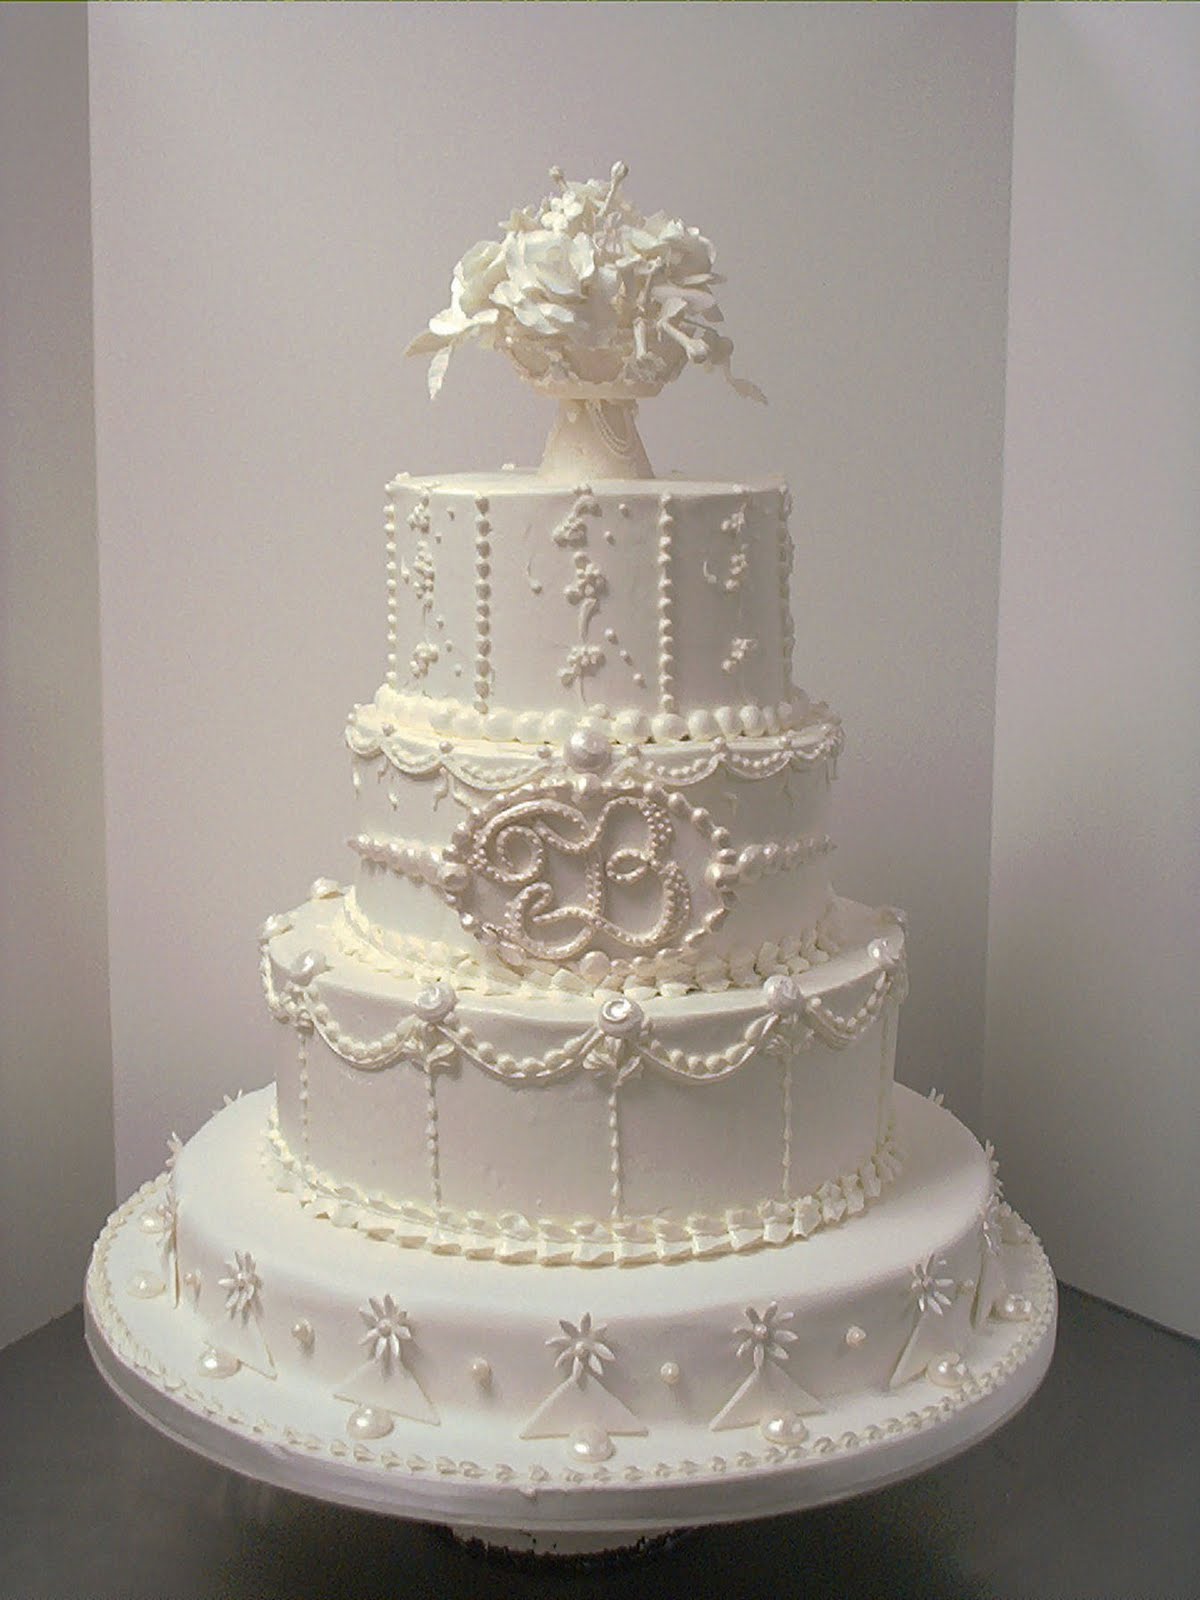 halloween wedding cakes Posted by keishadesign at 12:45 AM